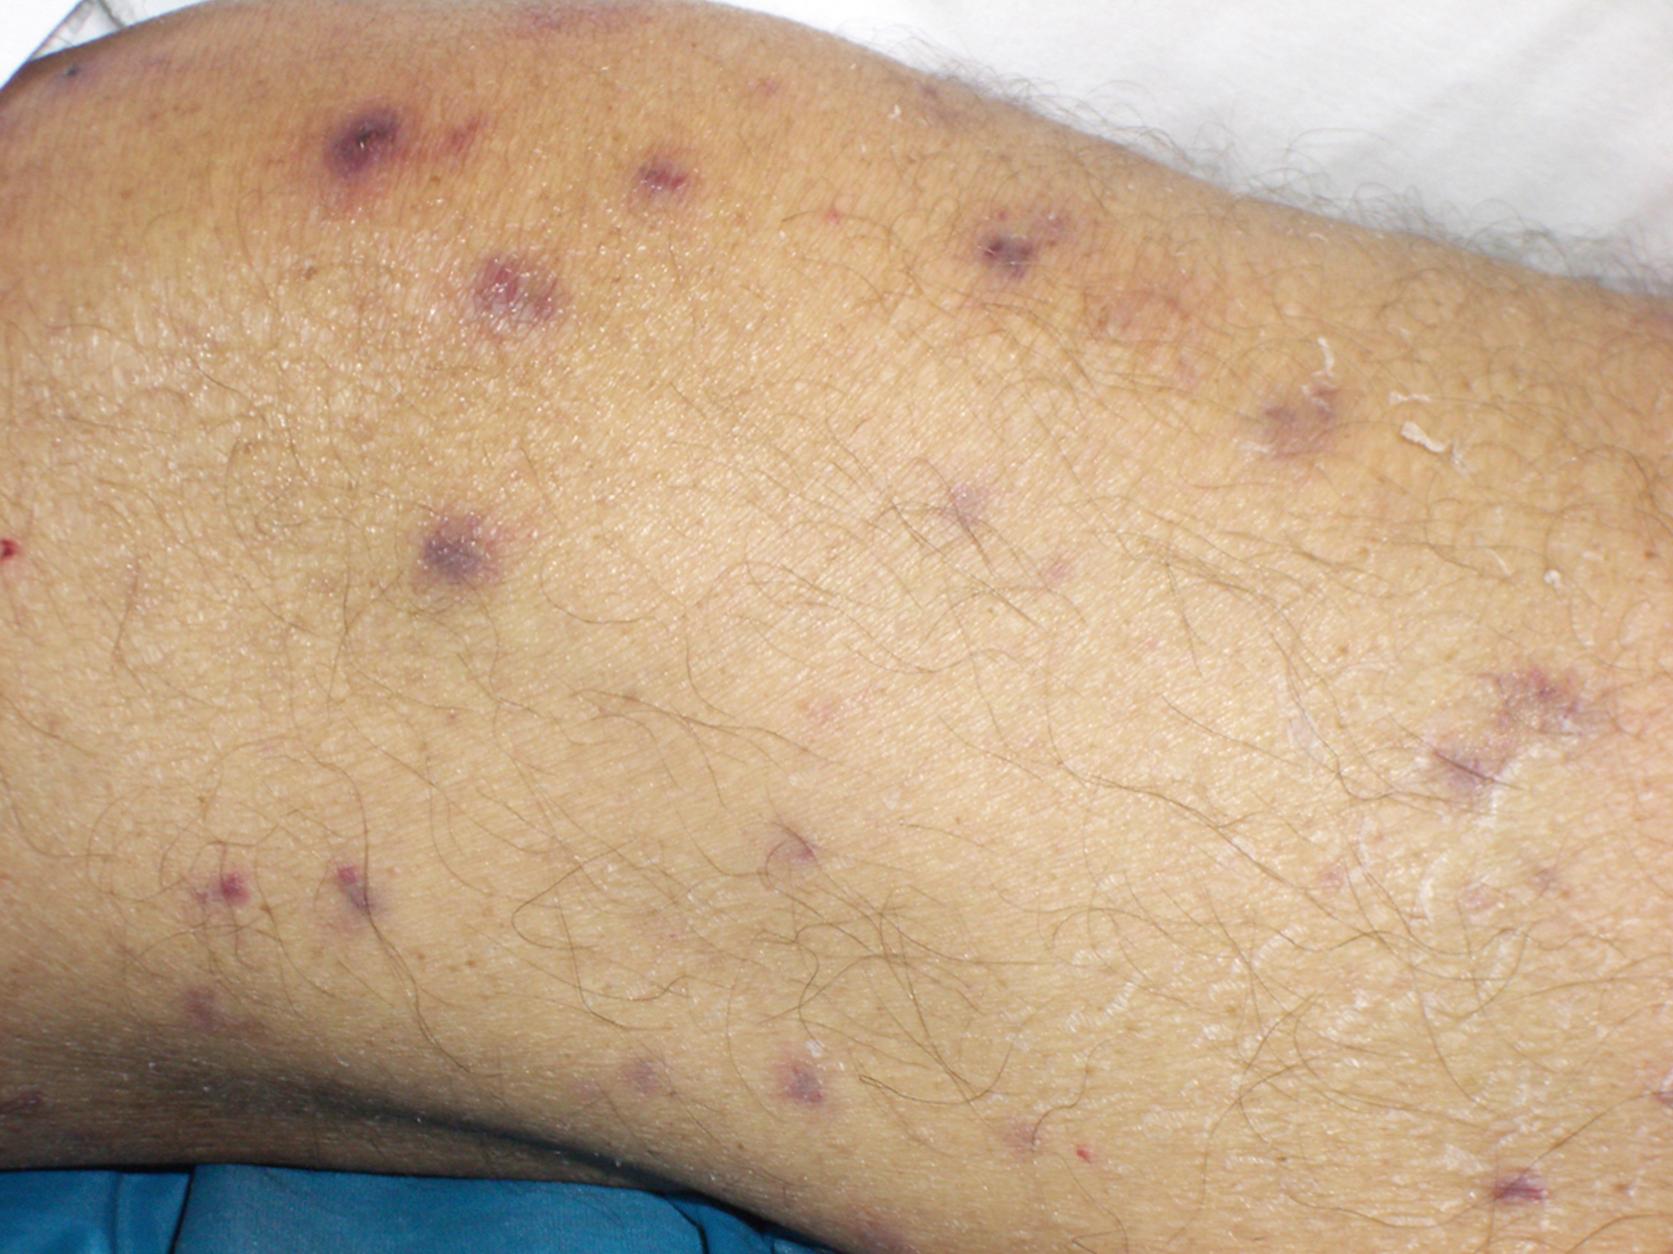 FIGURE 245.1, Typical necrotic-appearing skin lesions of Fusarium infection on the arm of a patient with disseminated disease.